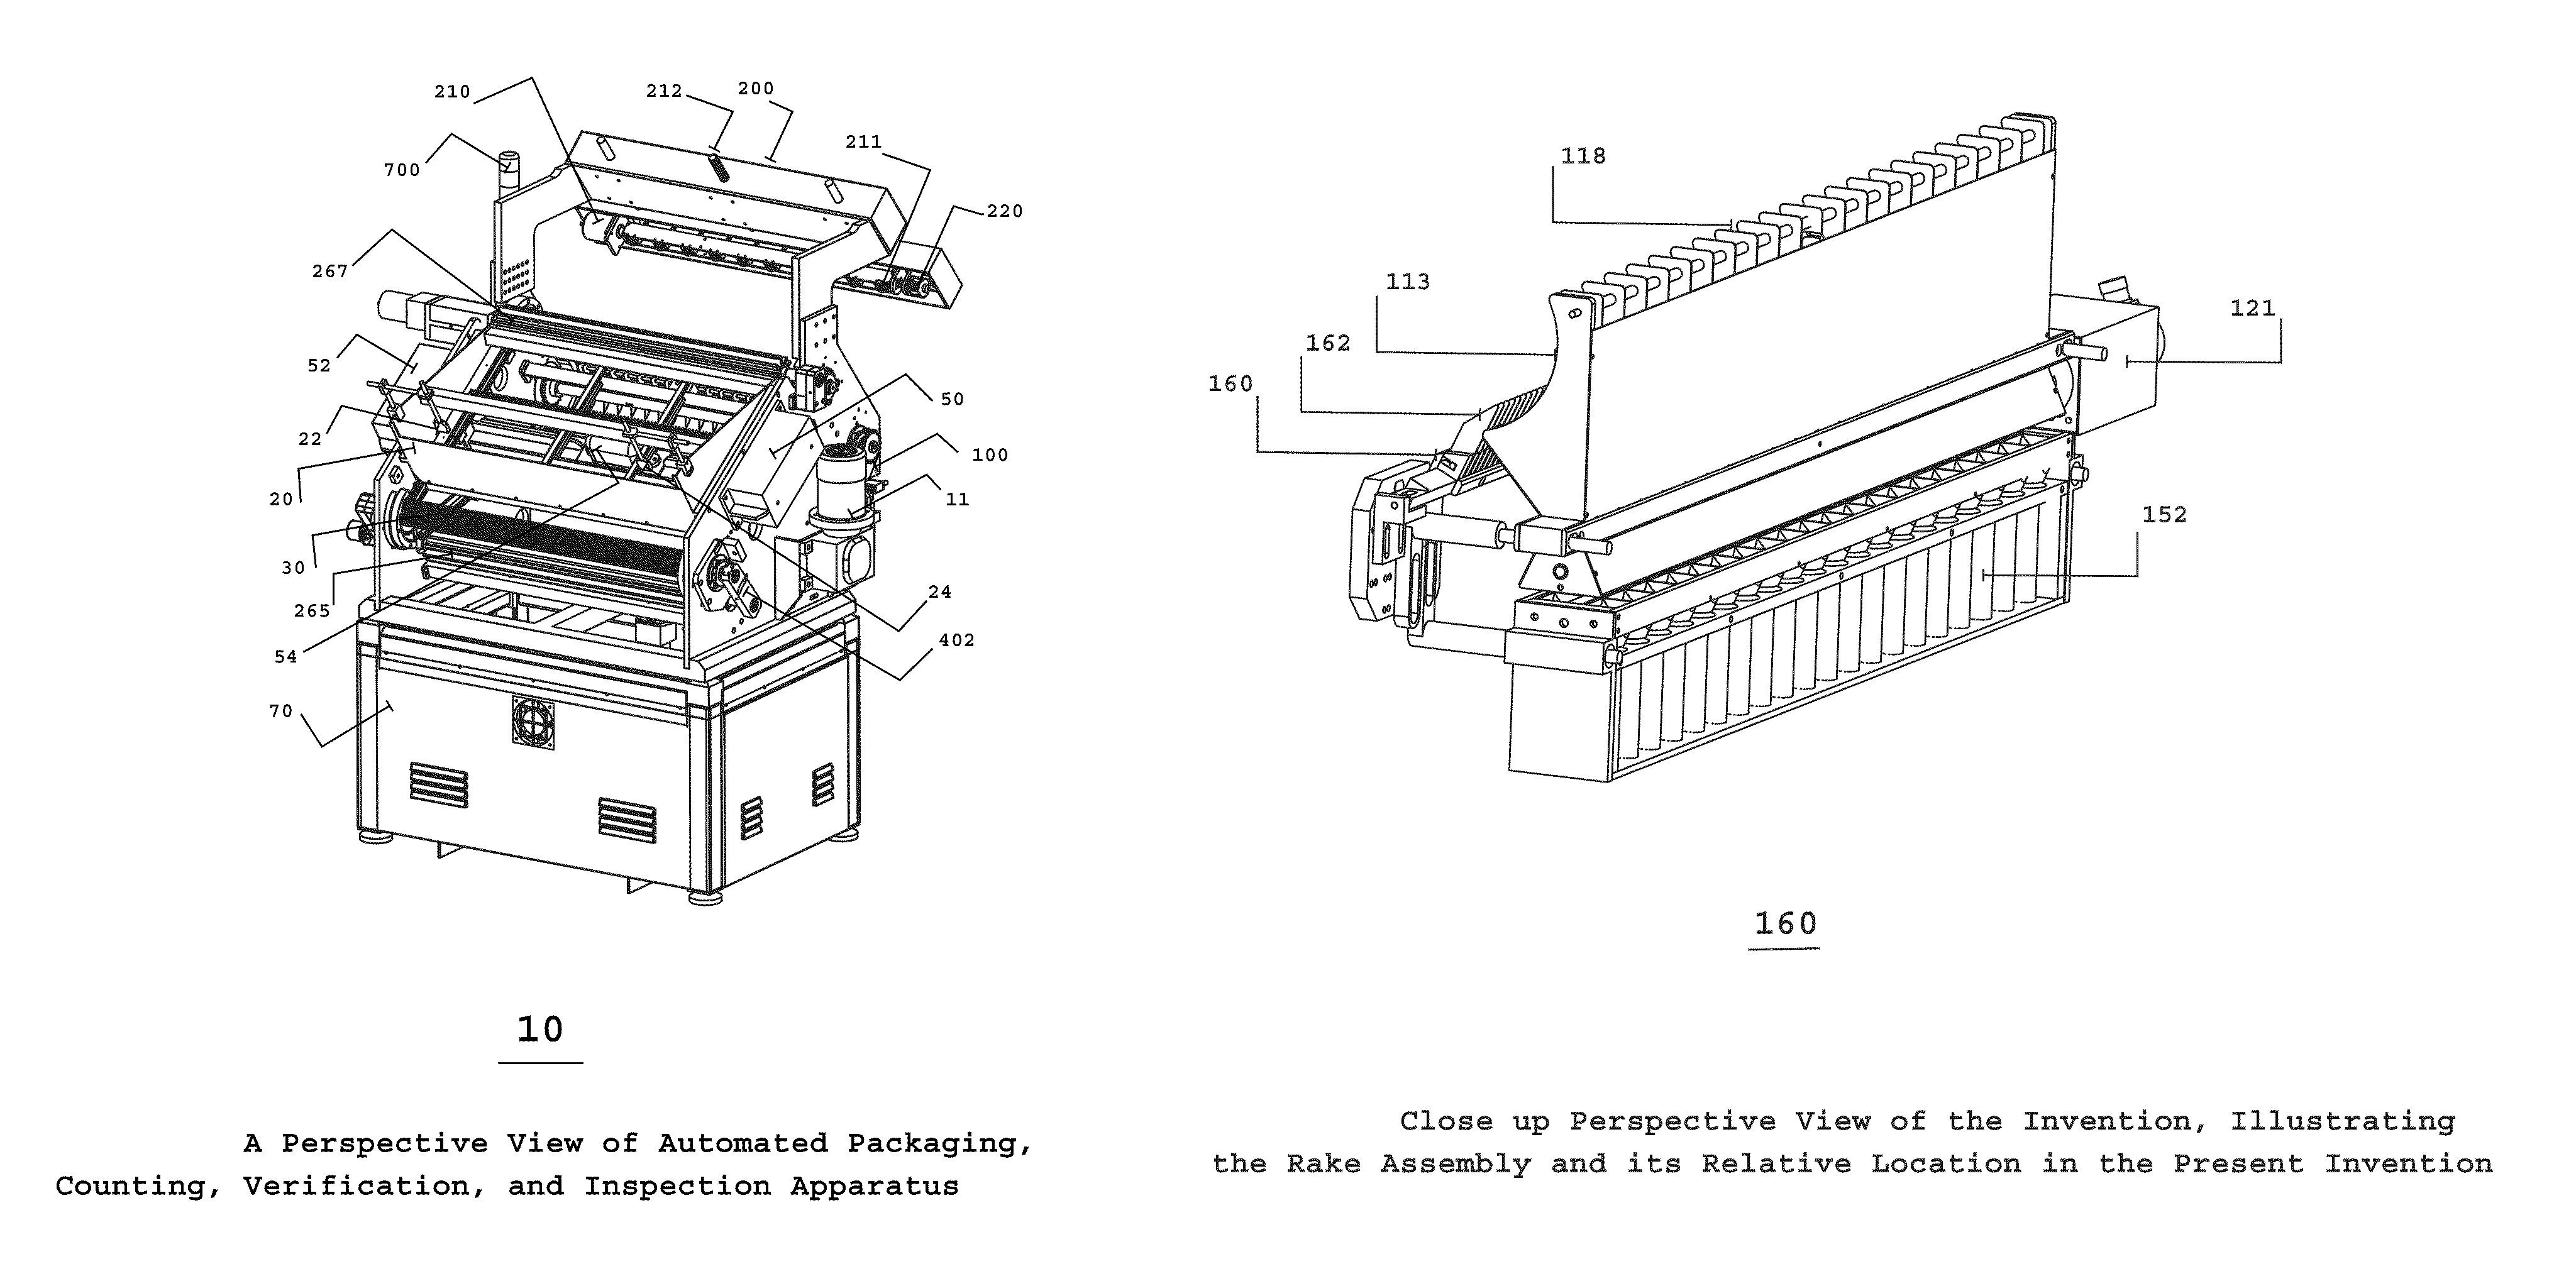 Automated packaging, inspection, verification, and counting apparatus